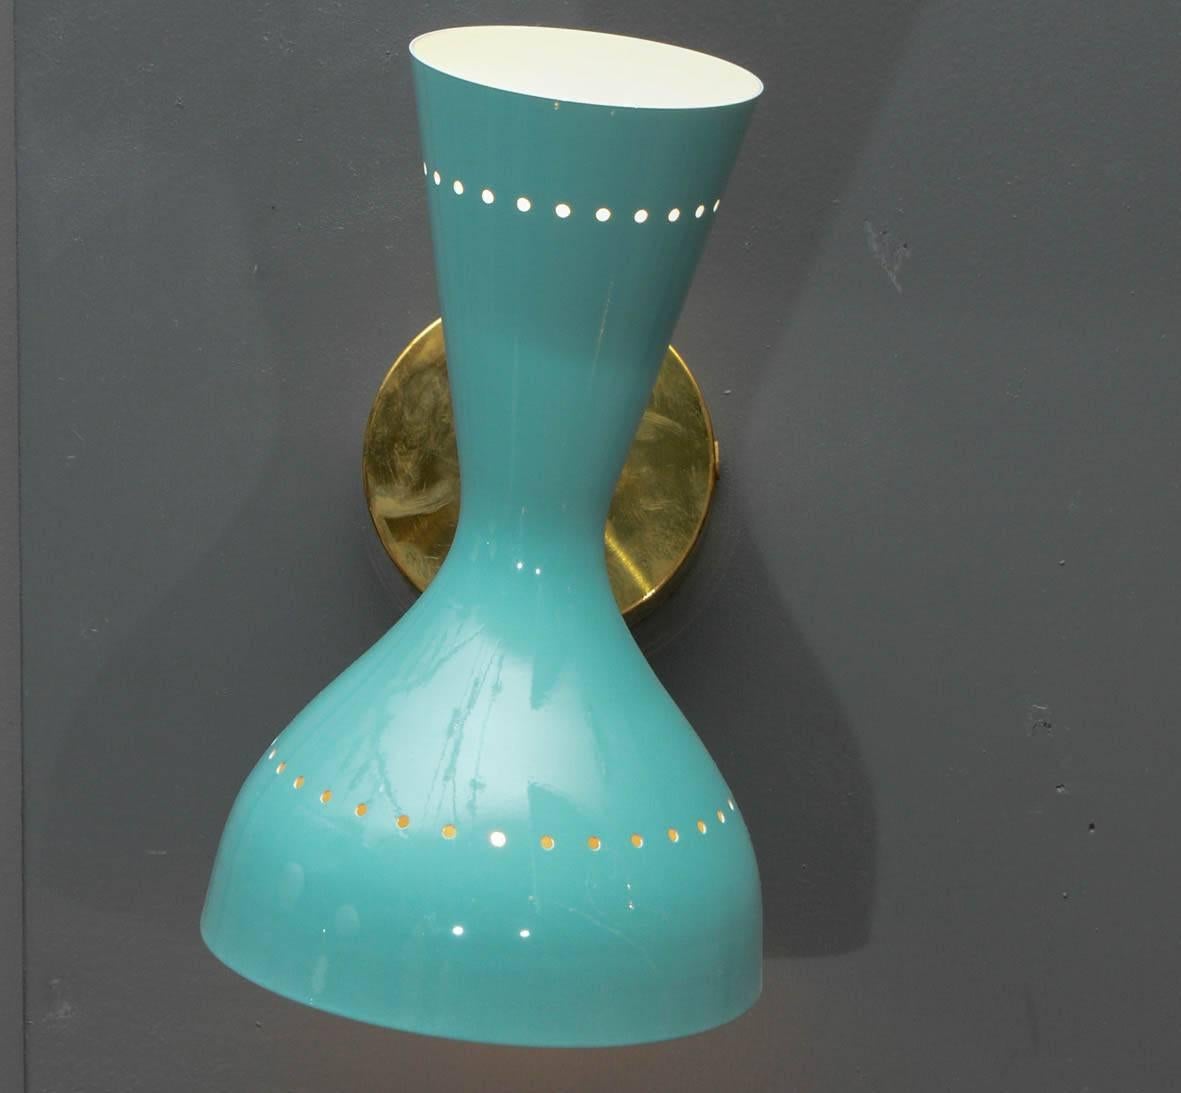 Pair of Italian wall sconces made of brass and an adjustable enameled metal cone with two lights.